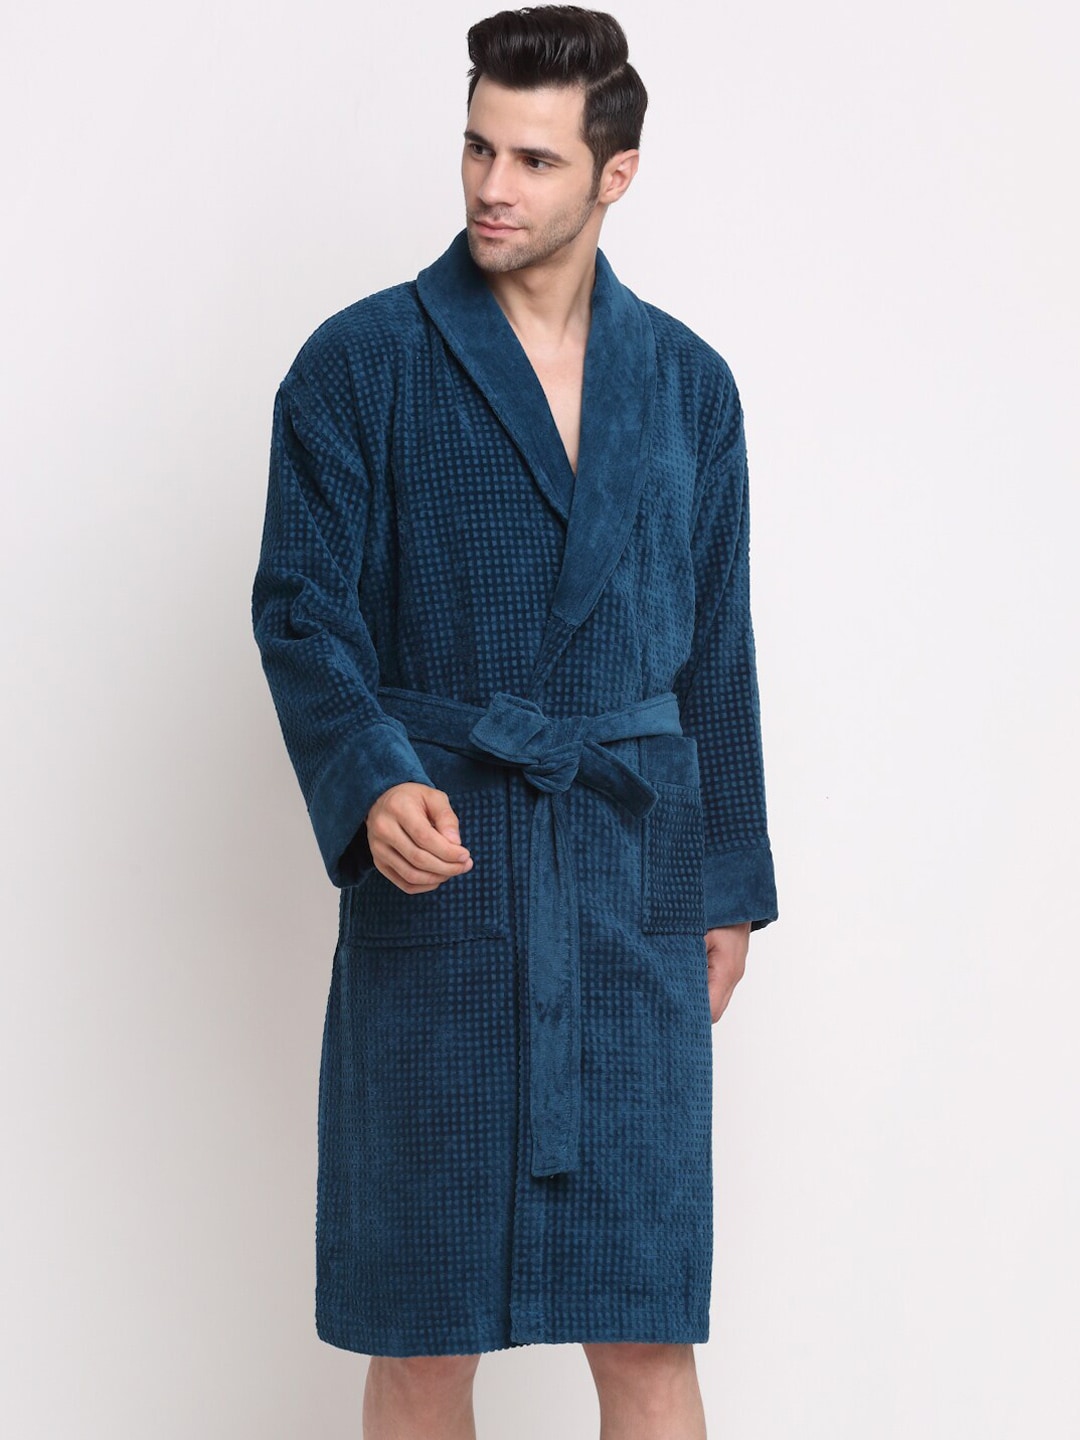 Trident Teal Blue Solid Bath Robe With Belt Price in India